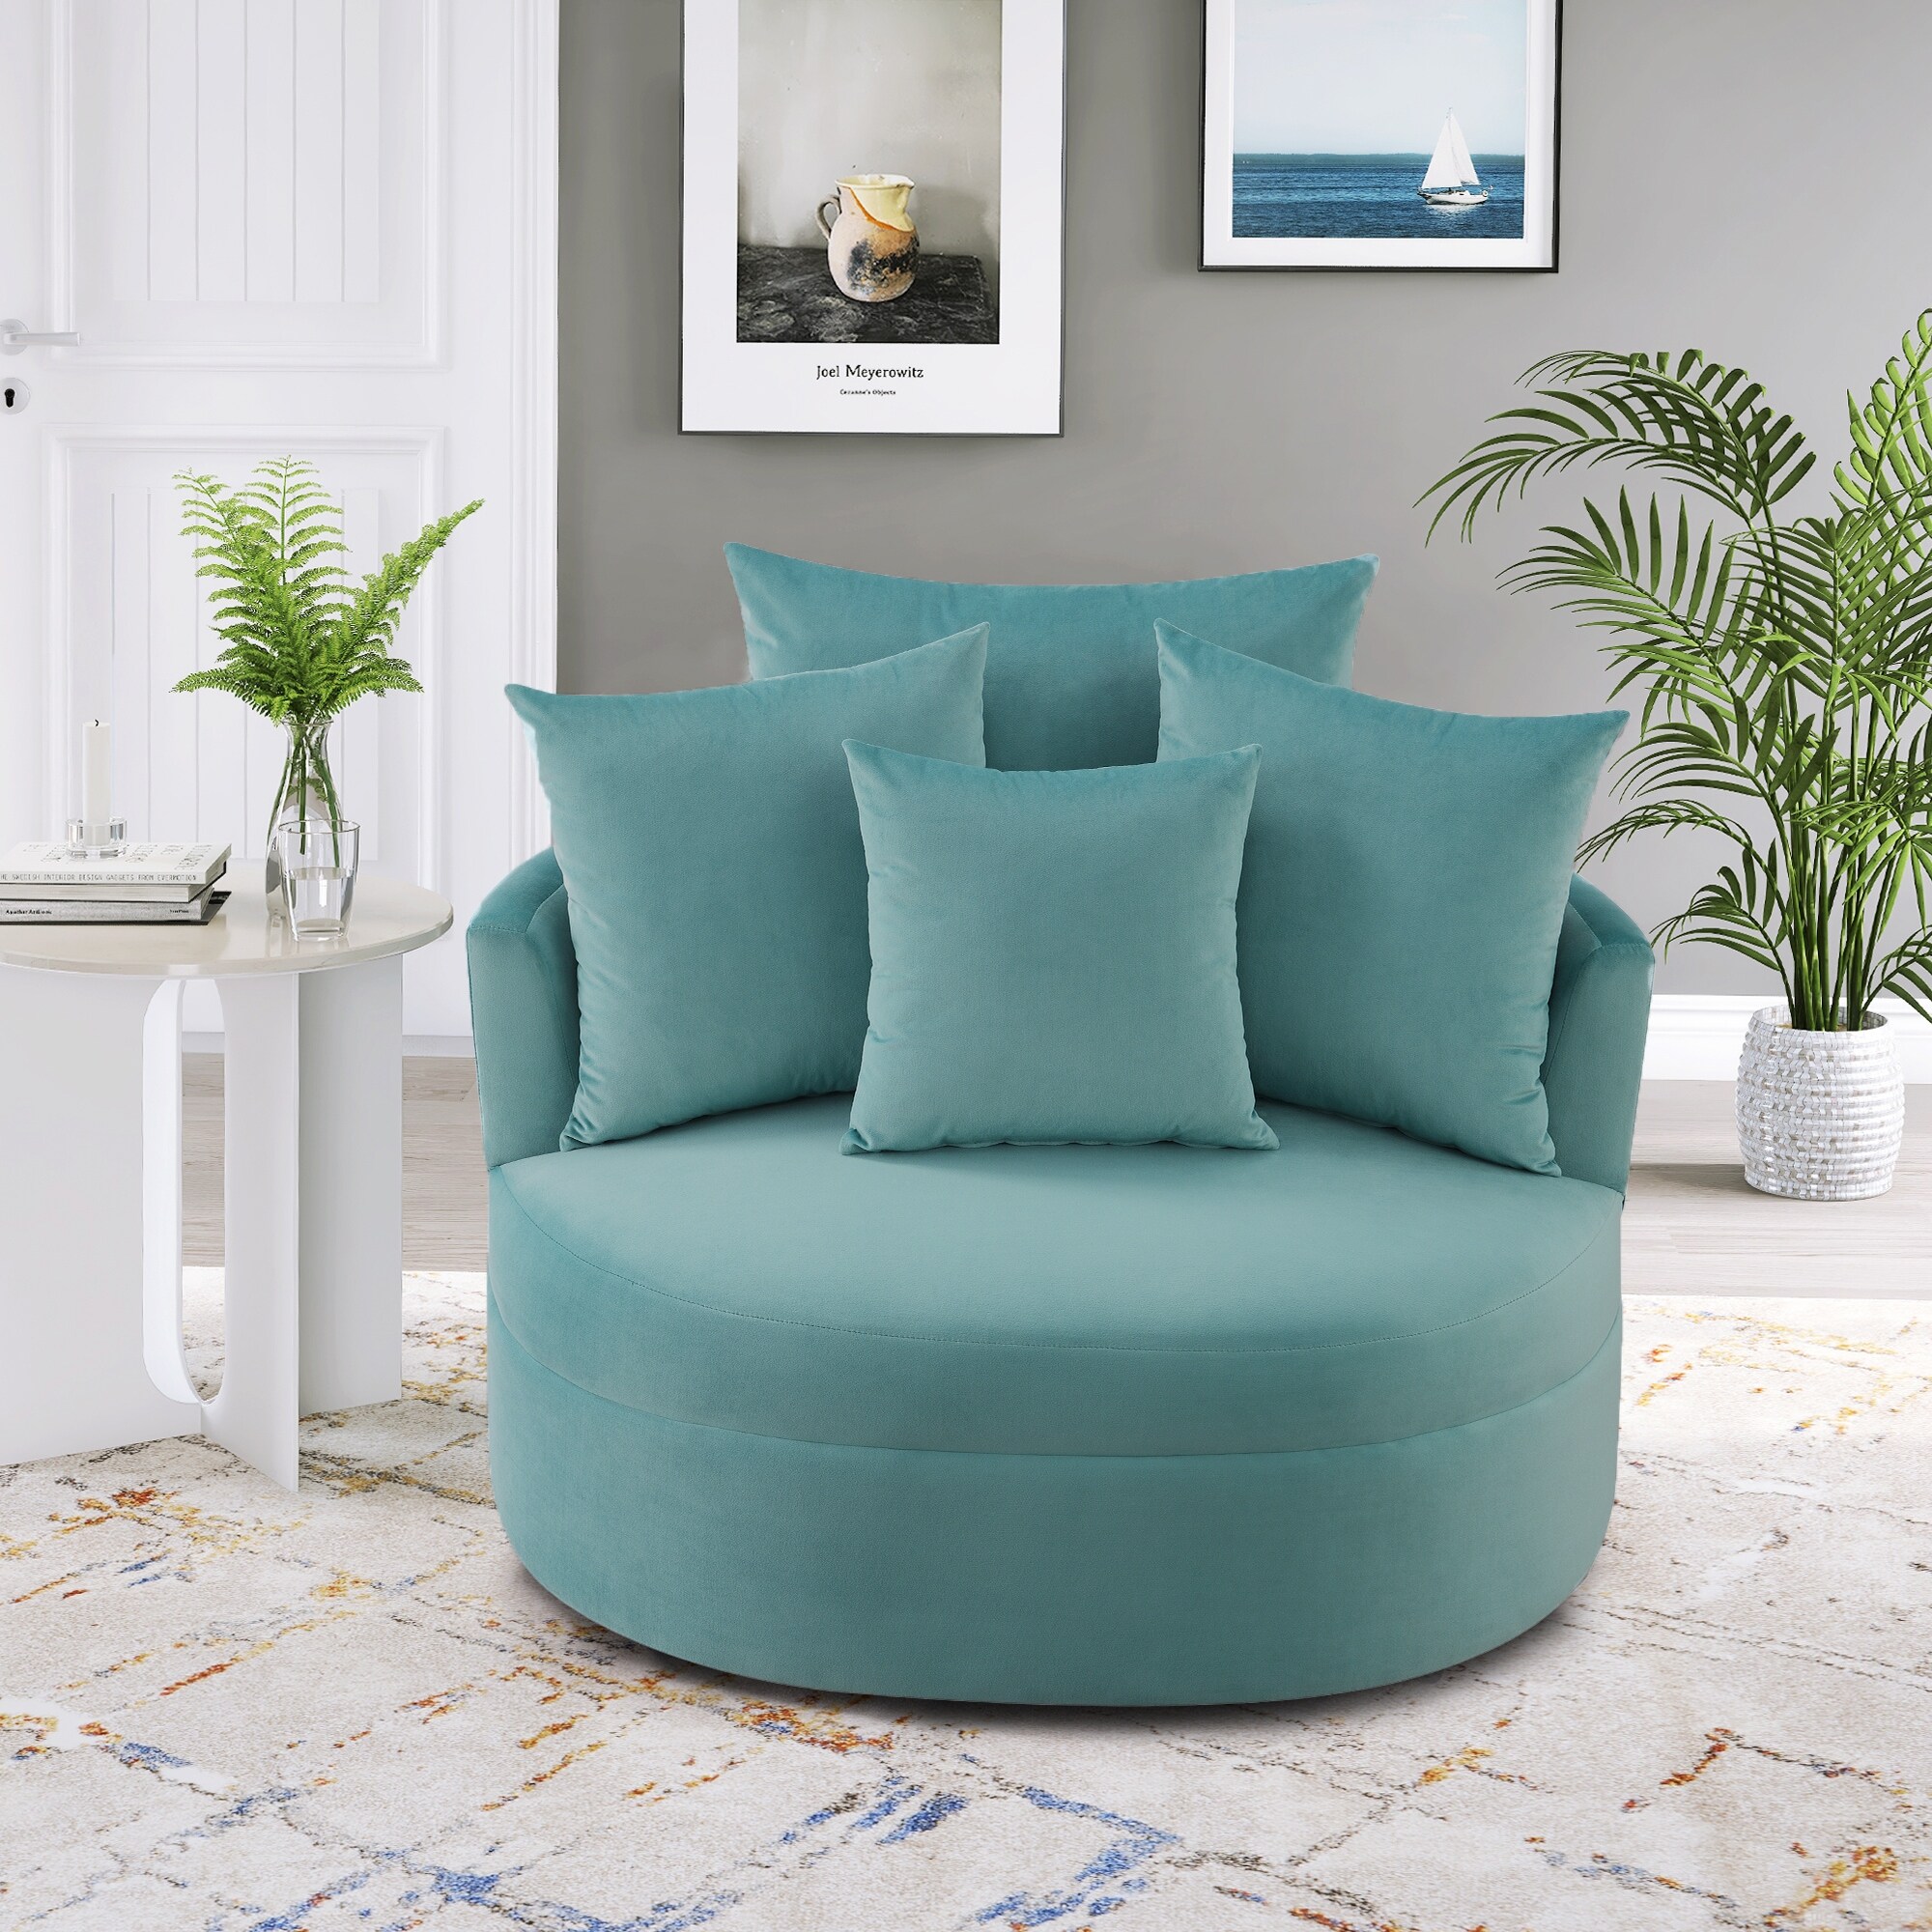 360° Swivel Barrel Chair with 4 Pillows, Velvet Leisure Chair Round Accent for Living Room